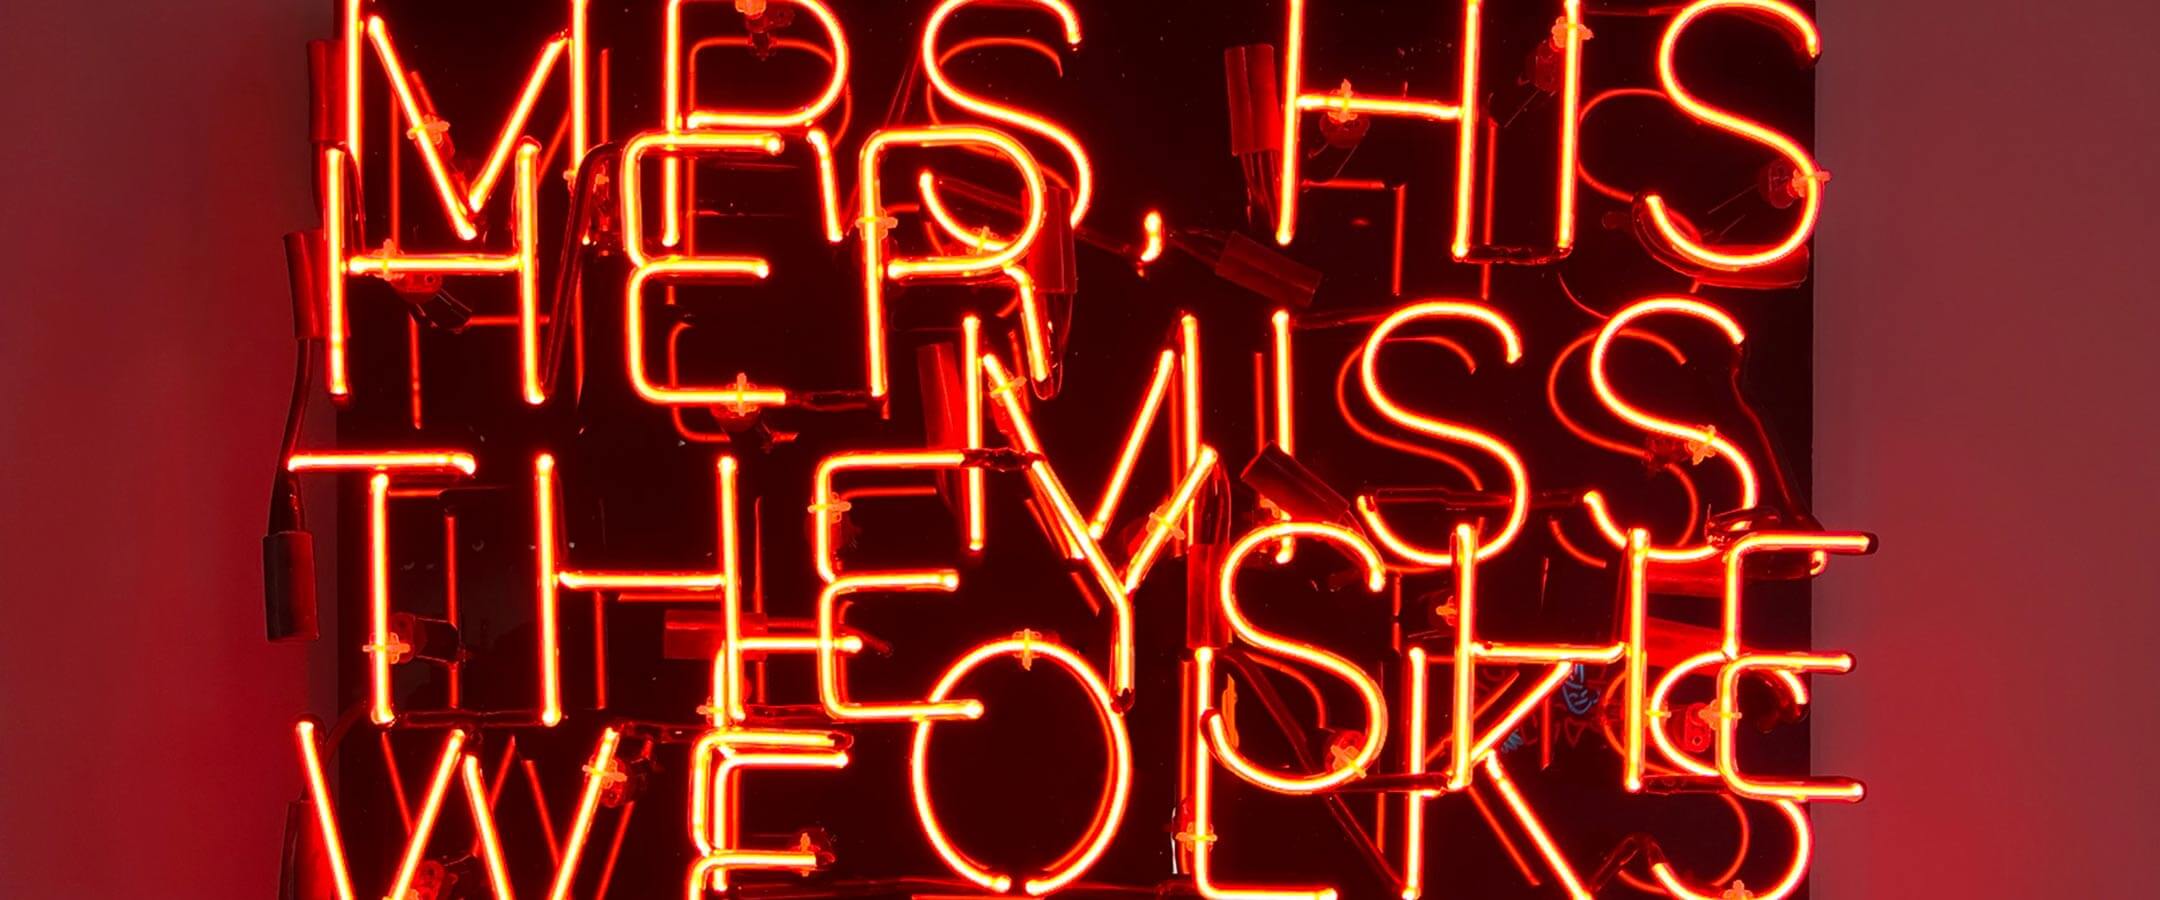 Pronouns rendered in neon red tubes are staggered on top of one another on a black background.